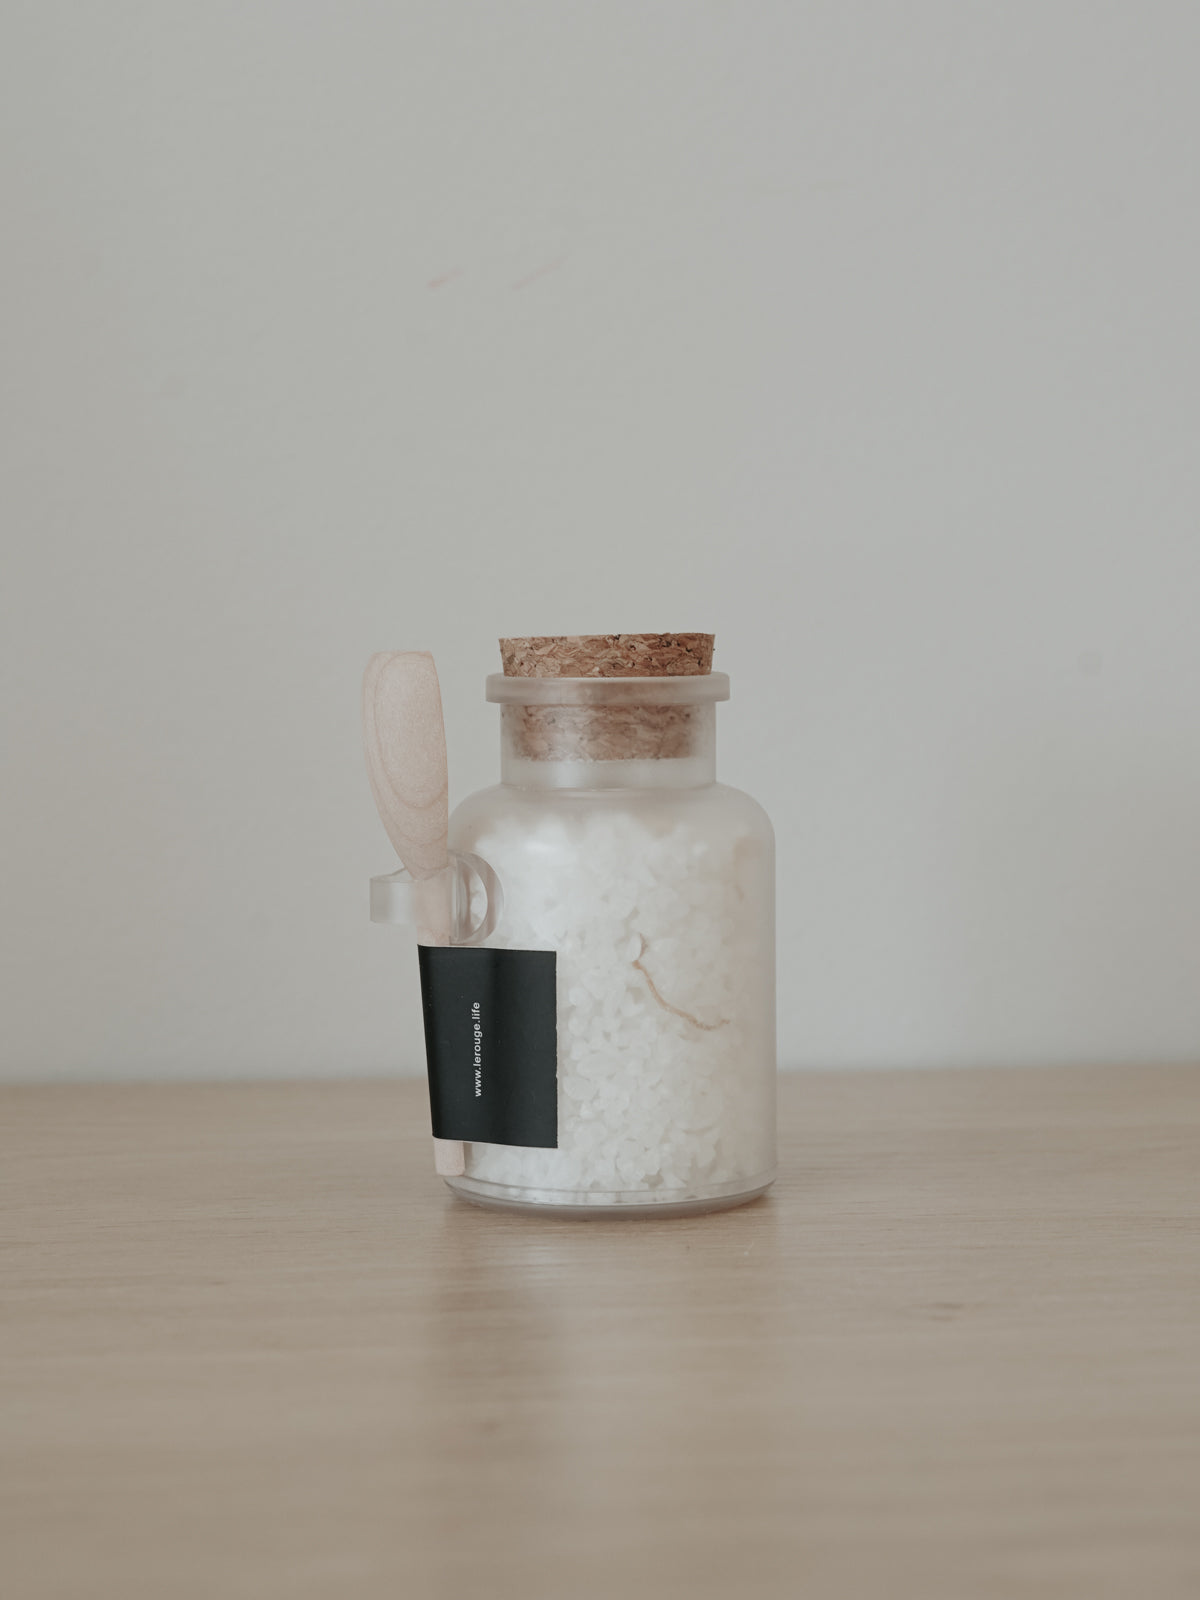 Relax Bath Salts with Spoon